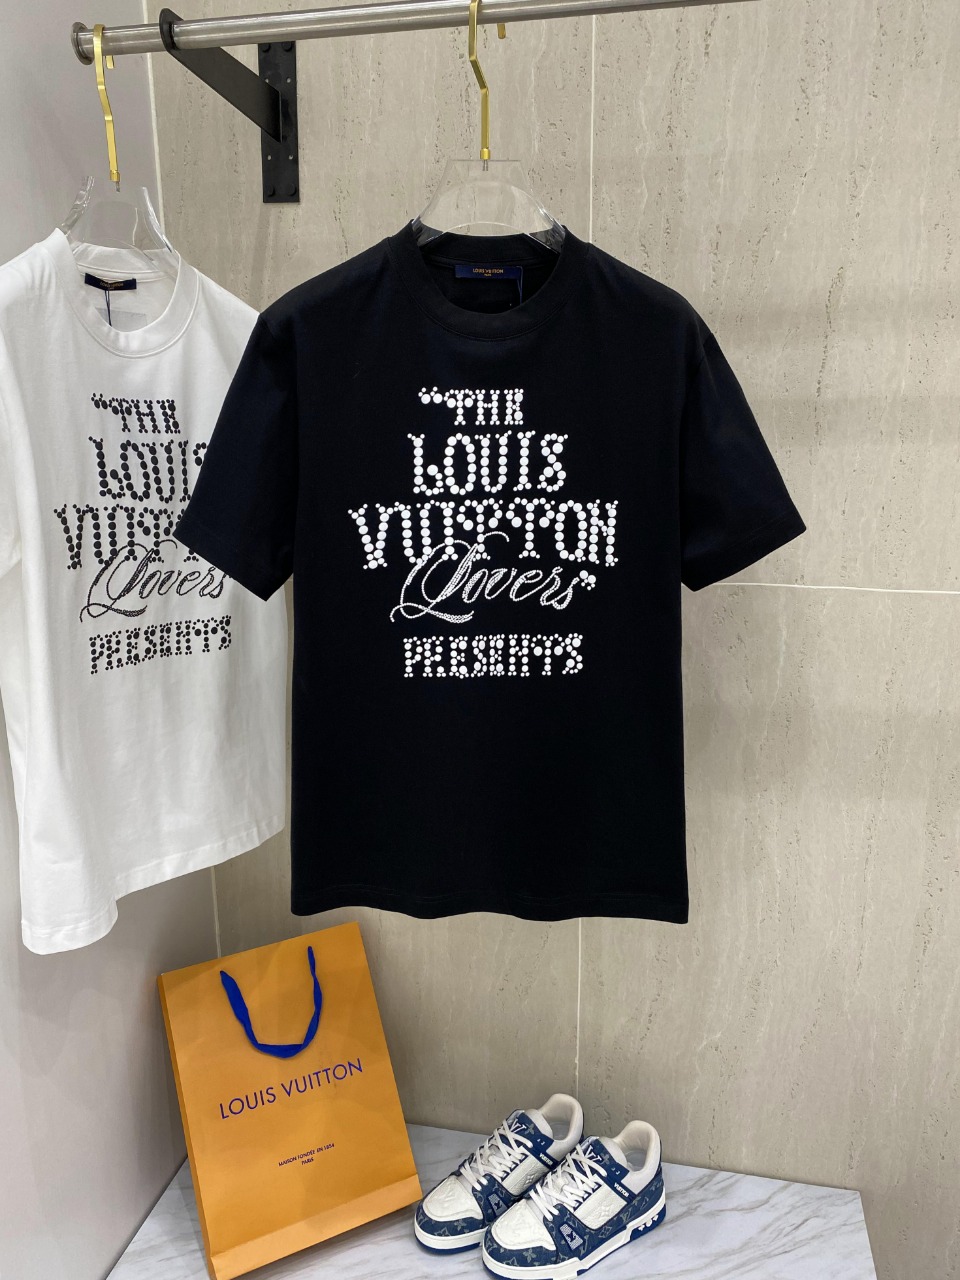 Louis Vuitton Knockoff
 Clothing T-Shirt Black White Unisex Cotton Spring/Summer Collection Short Sleeve